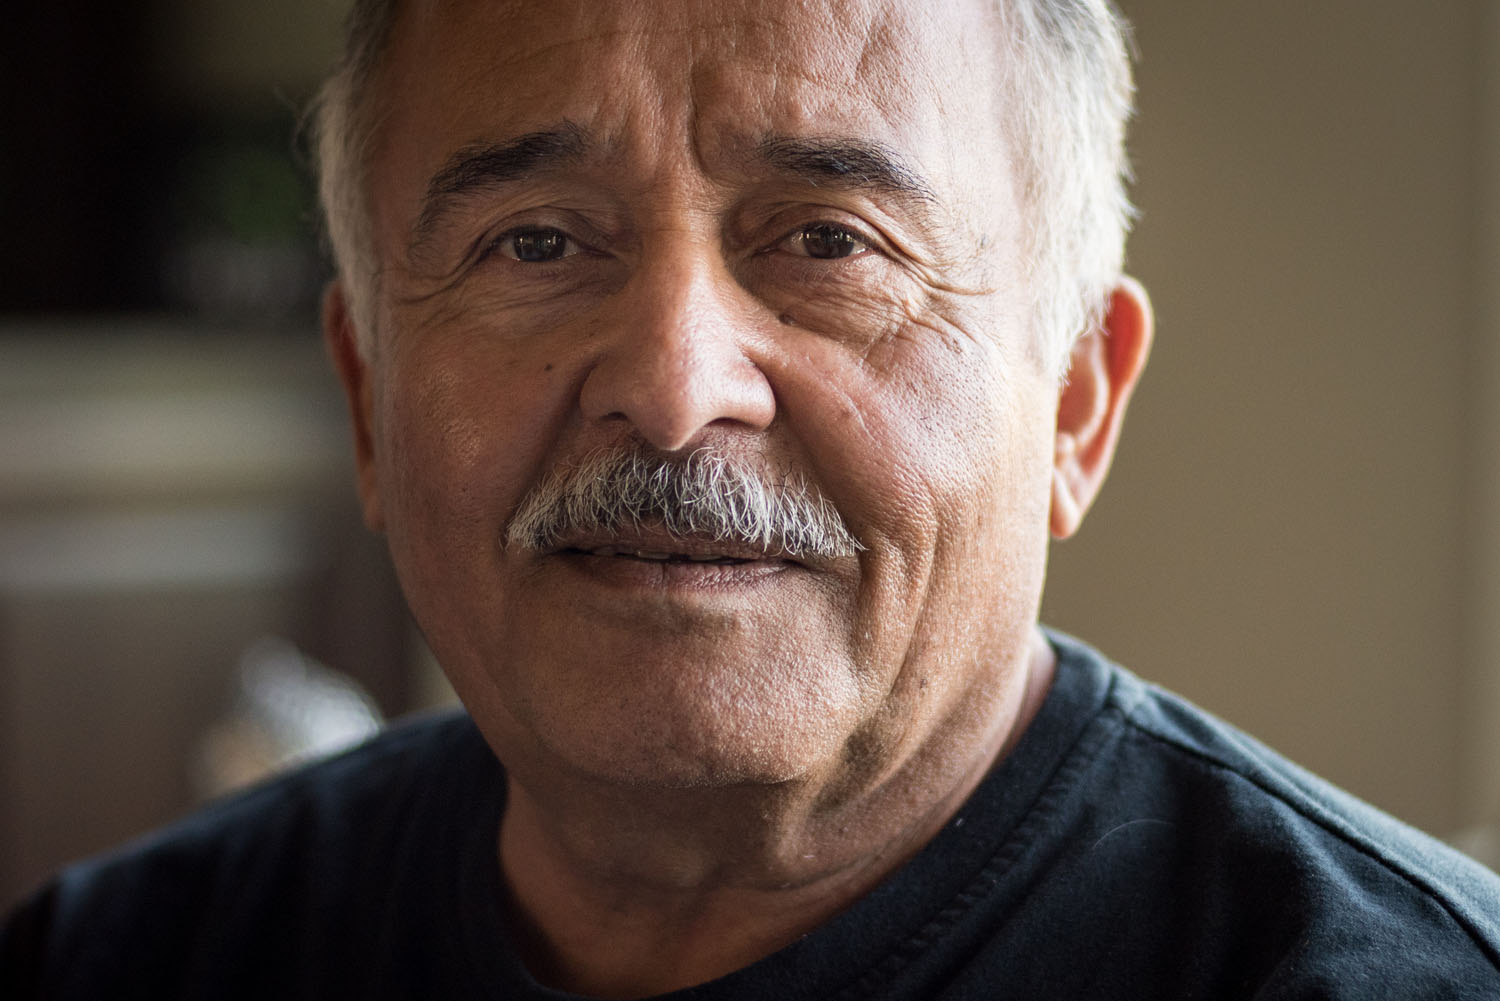 Abe Garza sits in his Tri-Cities home in September 2018. Photography by Sean McDermott.